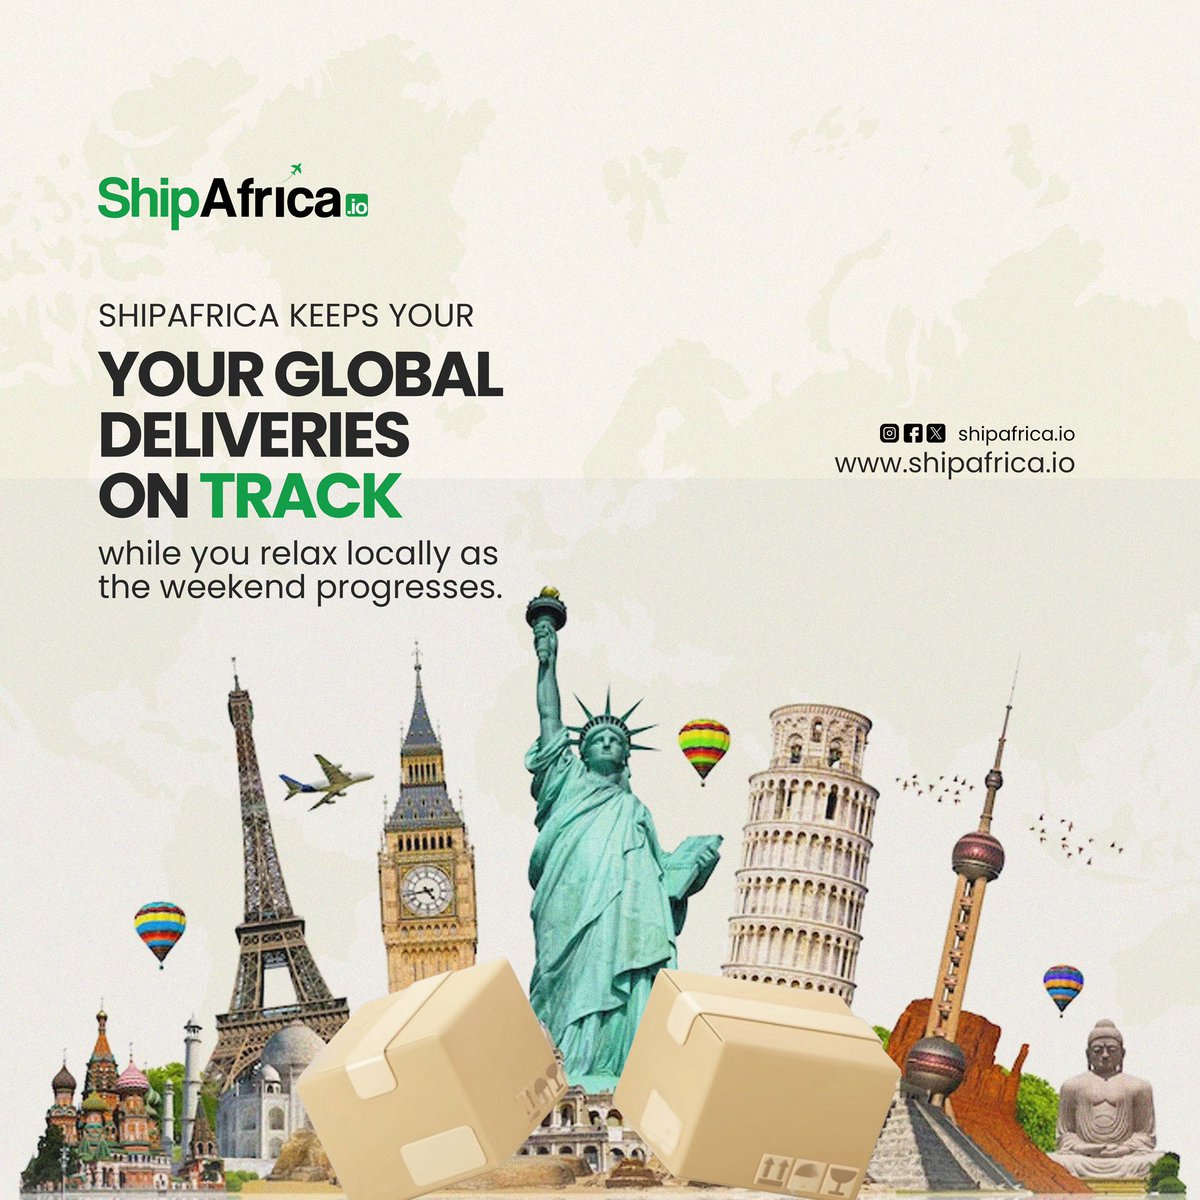 Let ShipAfrica handle the global legwork while you enjoy a local weekend retreat☺️🌍.

#shipafrica #supplychain #shipping #freight #warehousing #business #ecommerce #distribution #delivery #fedex #lastmiledelivery #globalshipping #worldwideshipping #internationaldelivery #courier